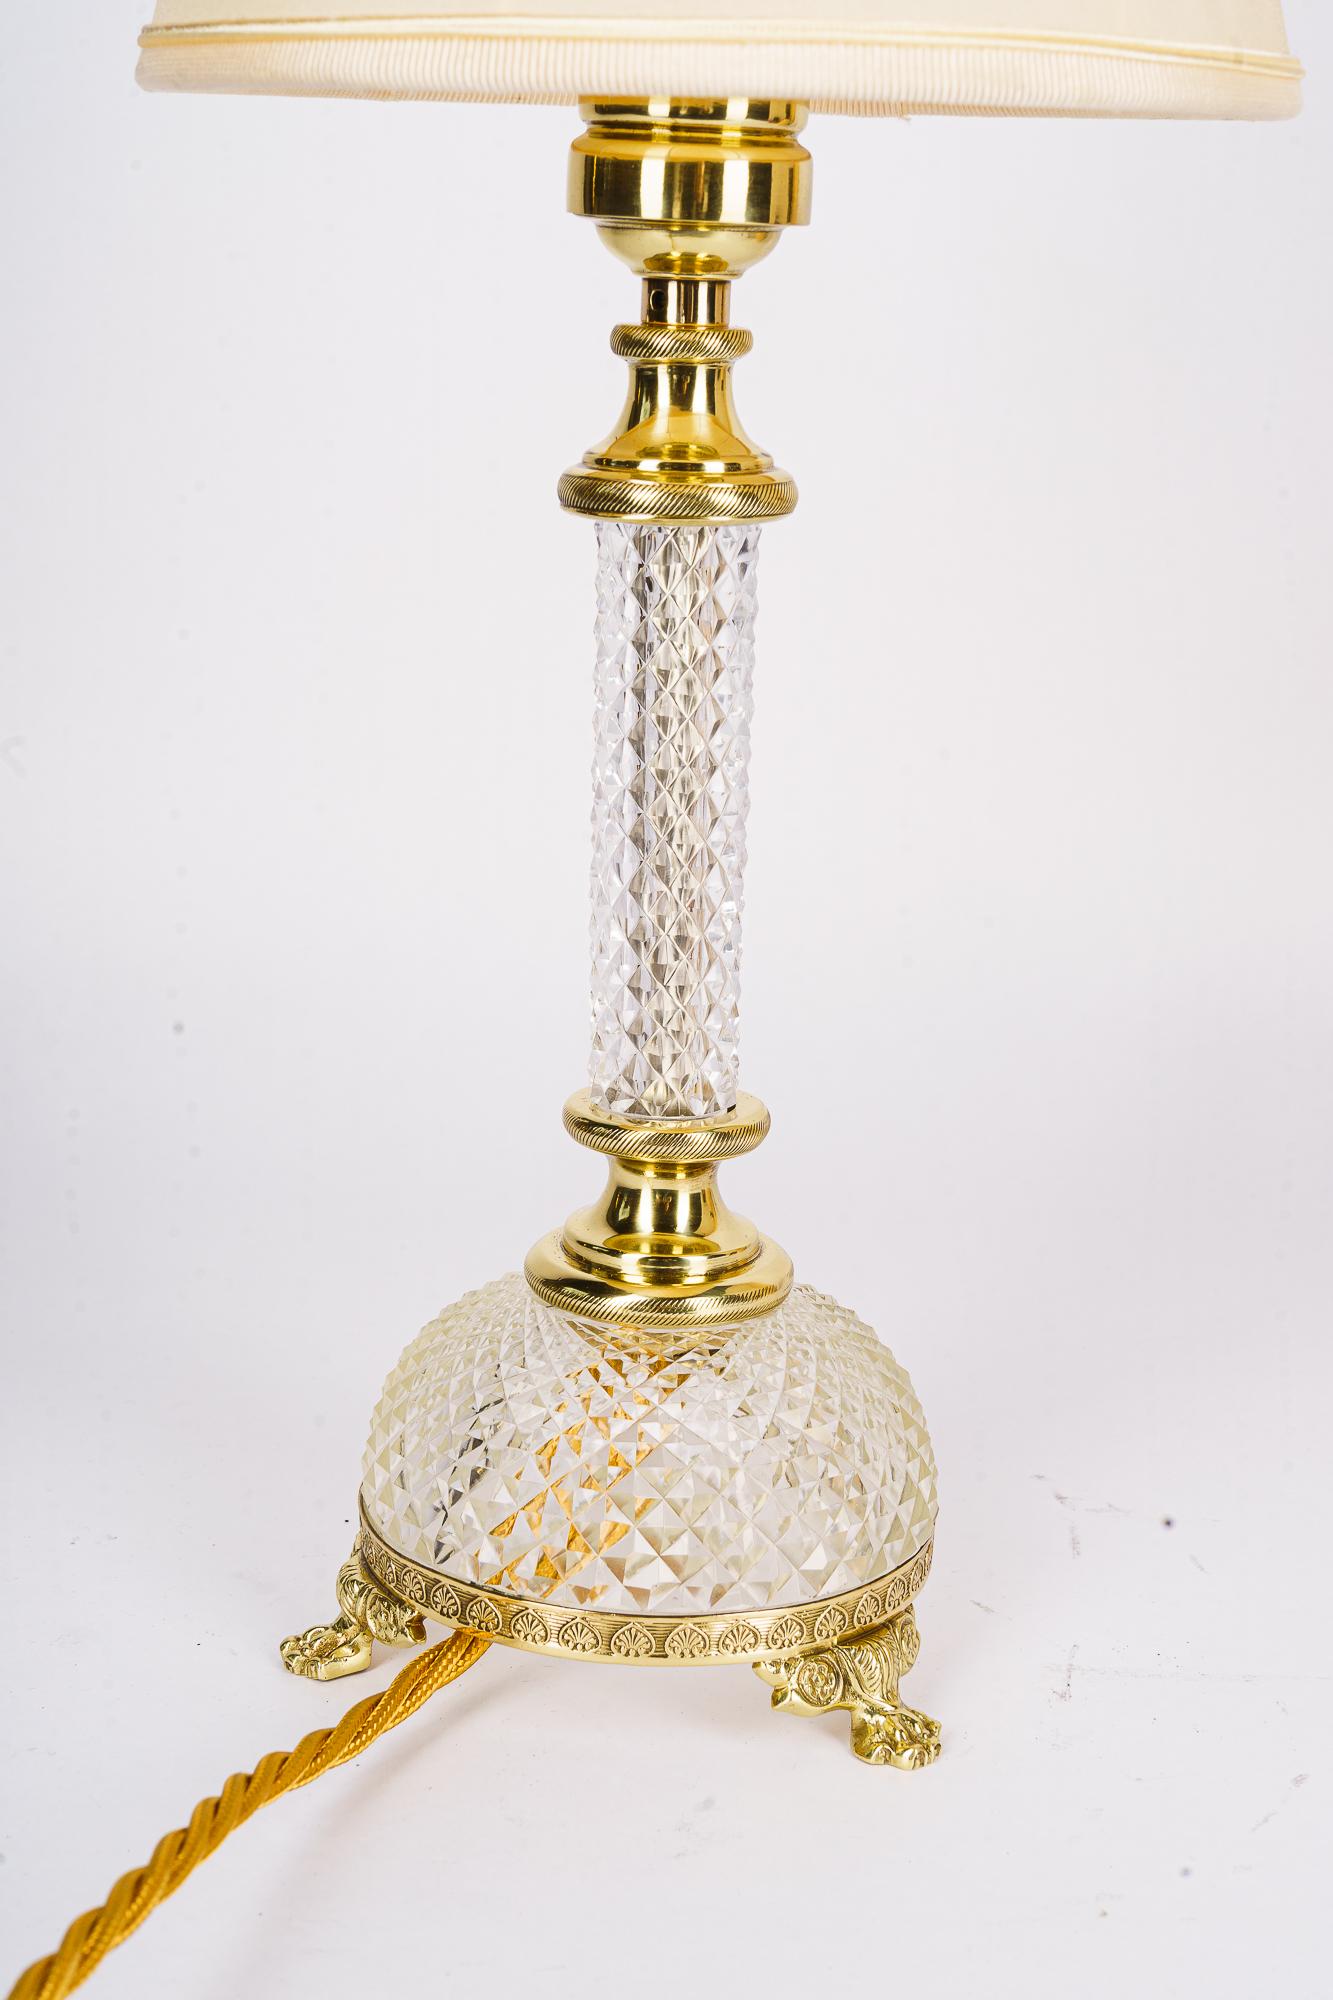 Art Deco fine cut glass table lamp with fabric shade vienna around 1920s
High quality work
Brass polished and stove enamled